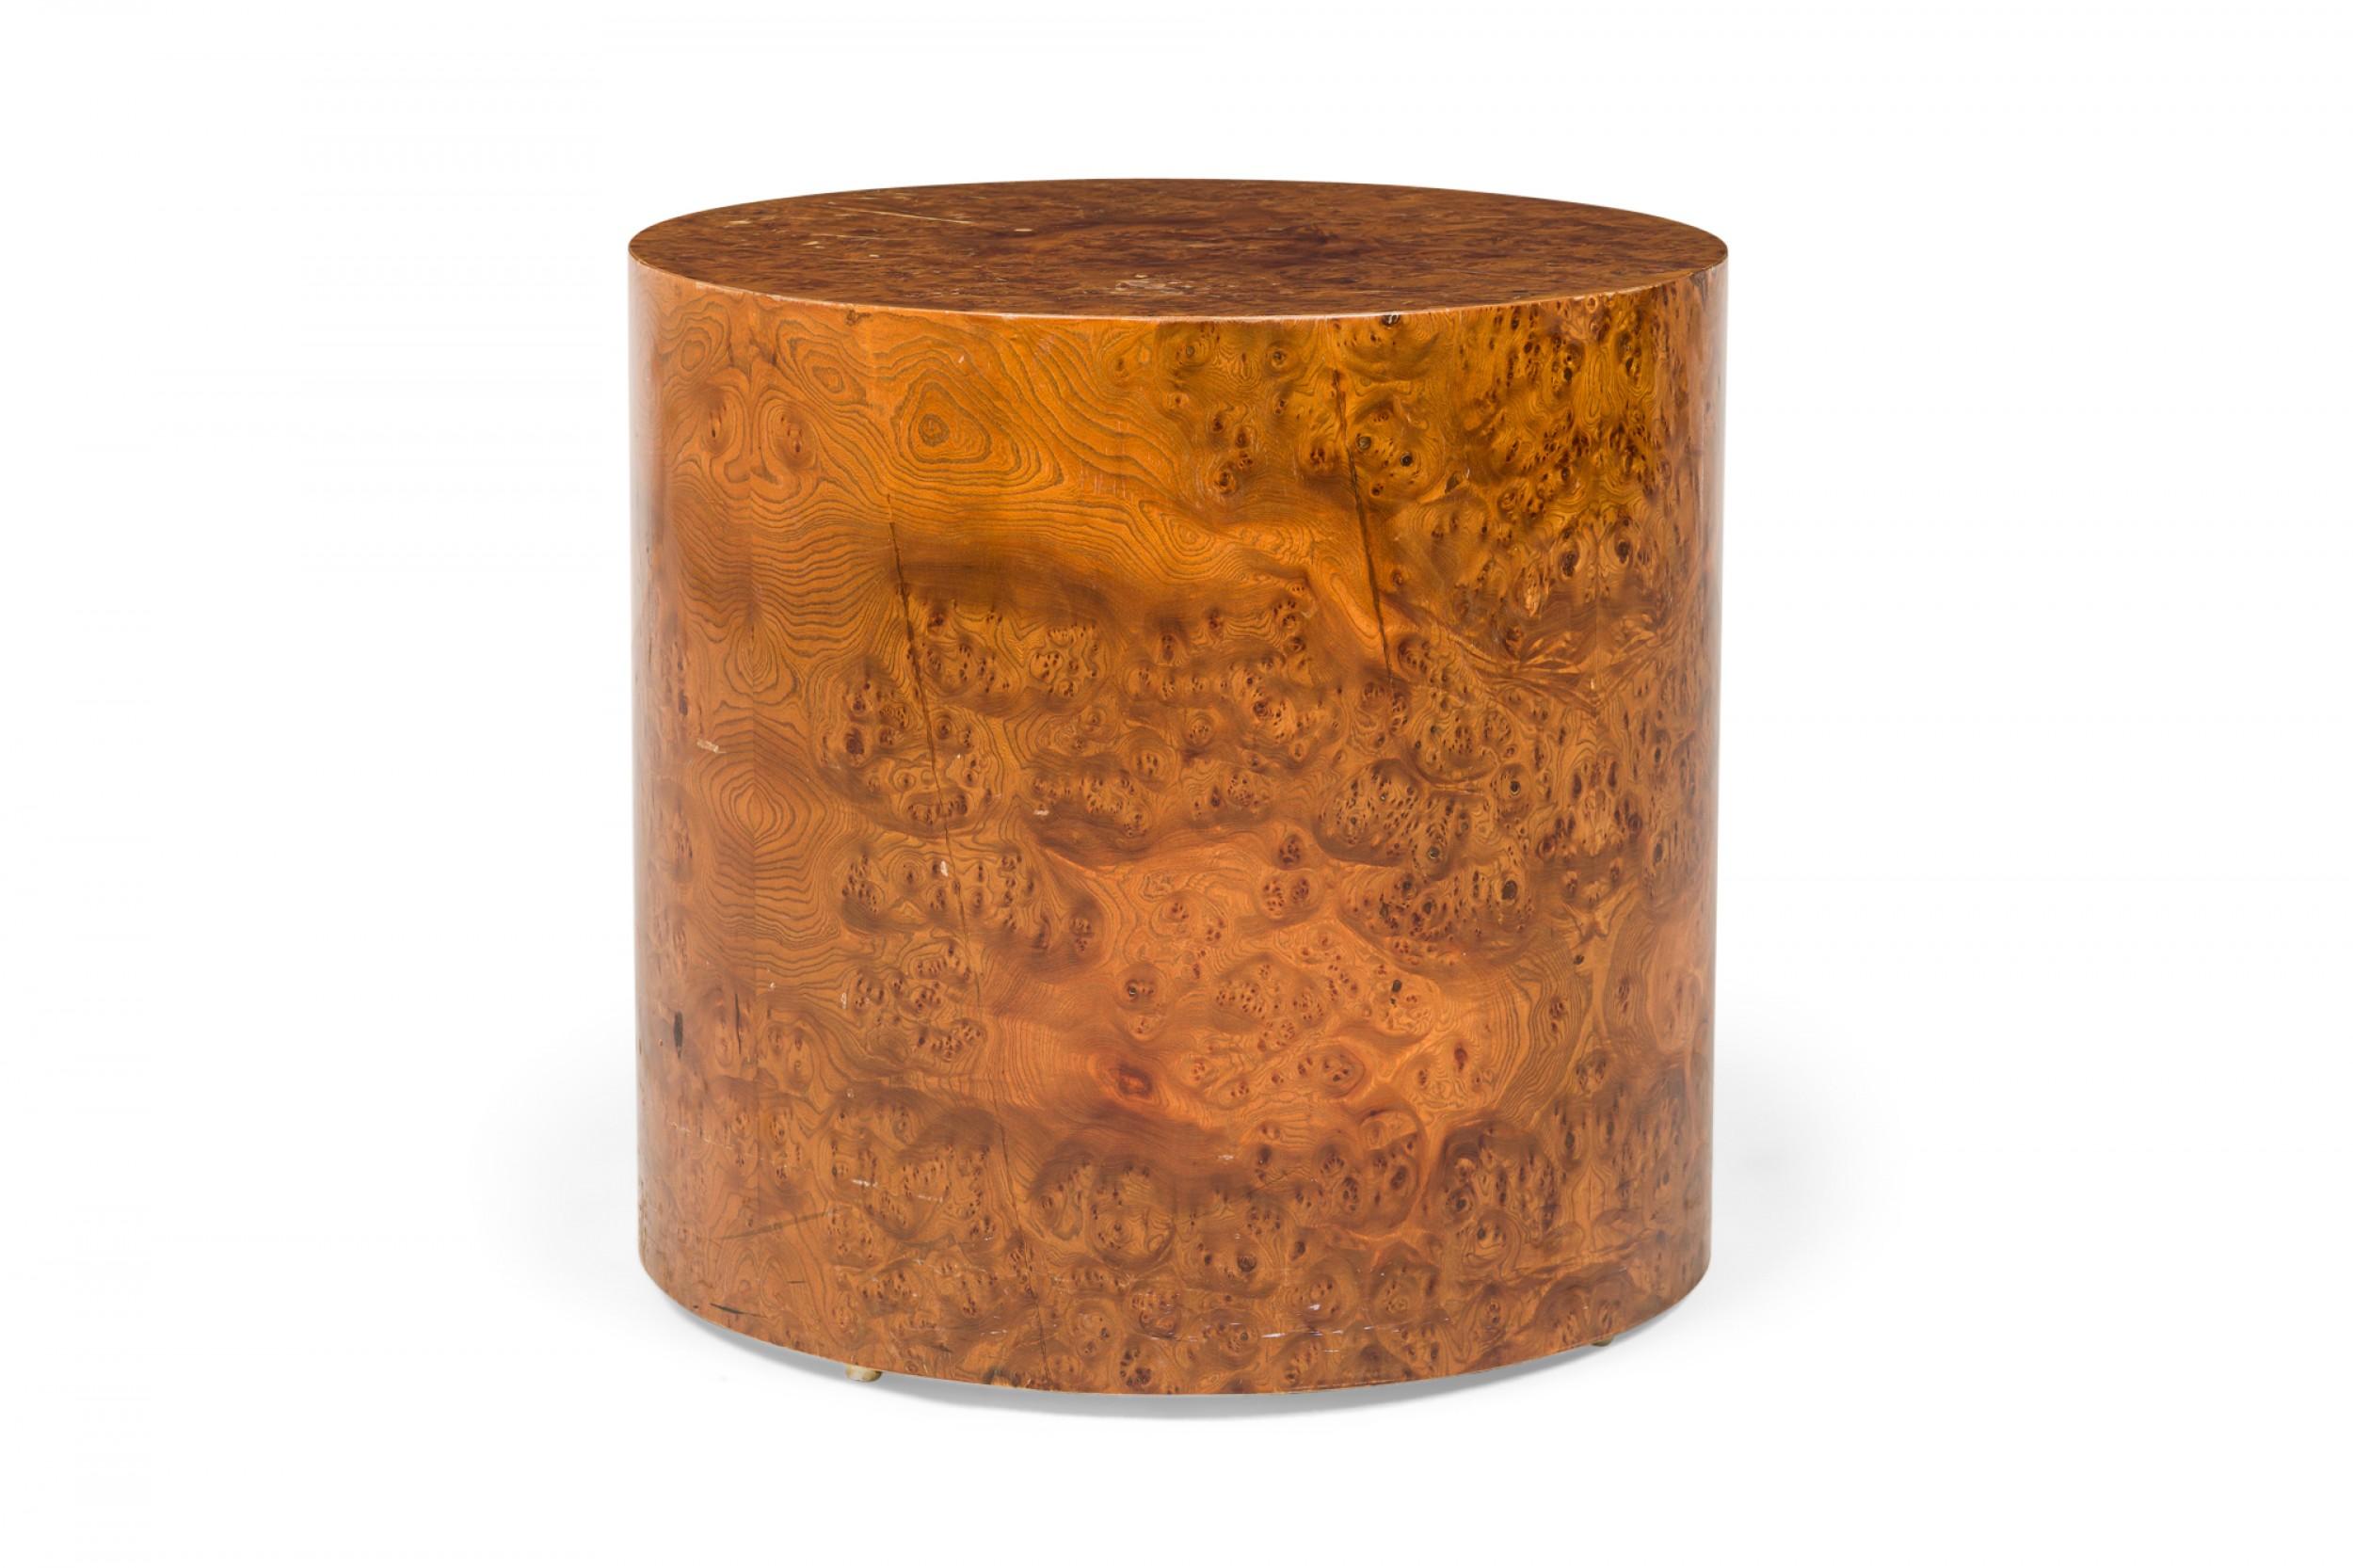 American Mid-Century drum form end / side table with an ash burl wood veneer. (MILO BAUGHMAN FOR DIRECTIONAL FURNITURE COMPANY)